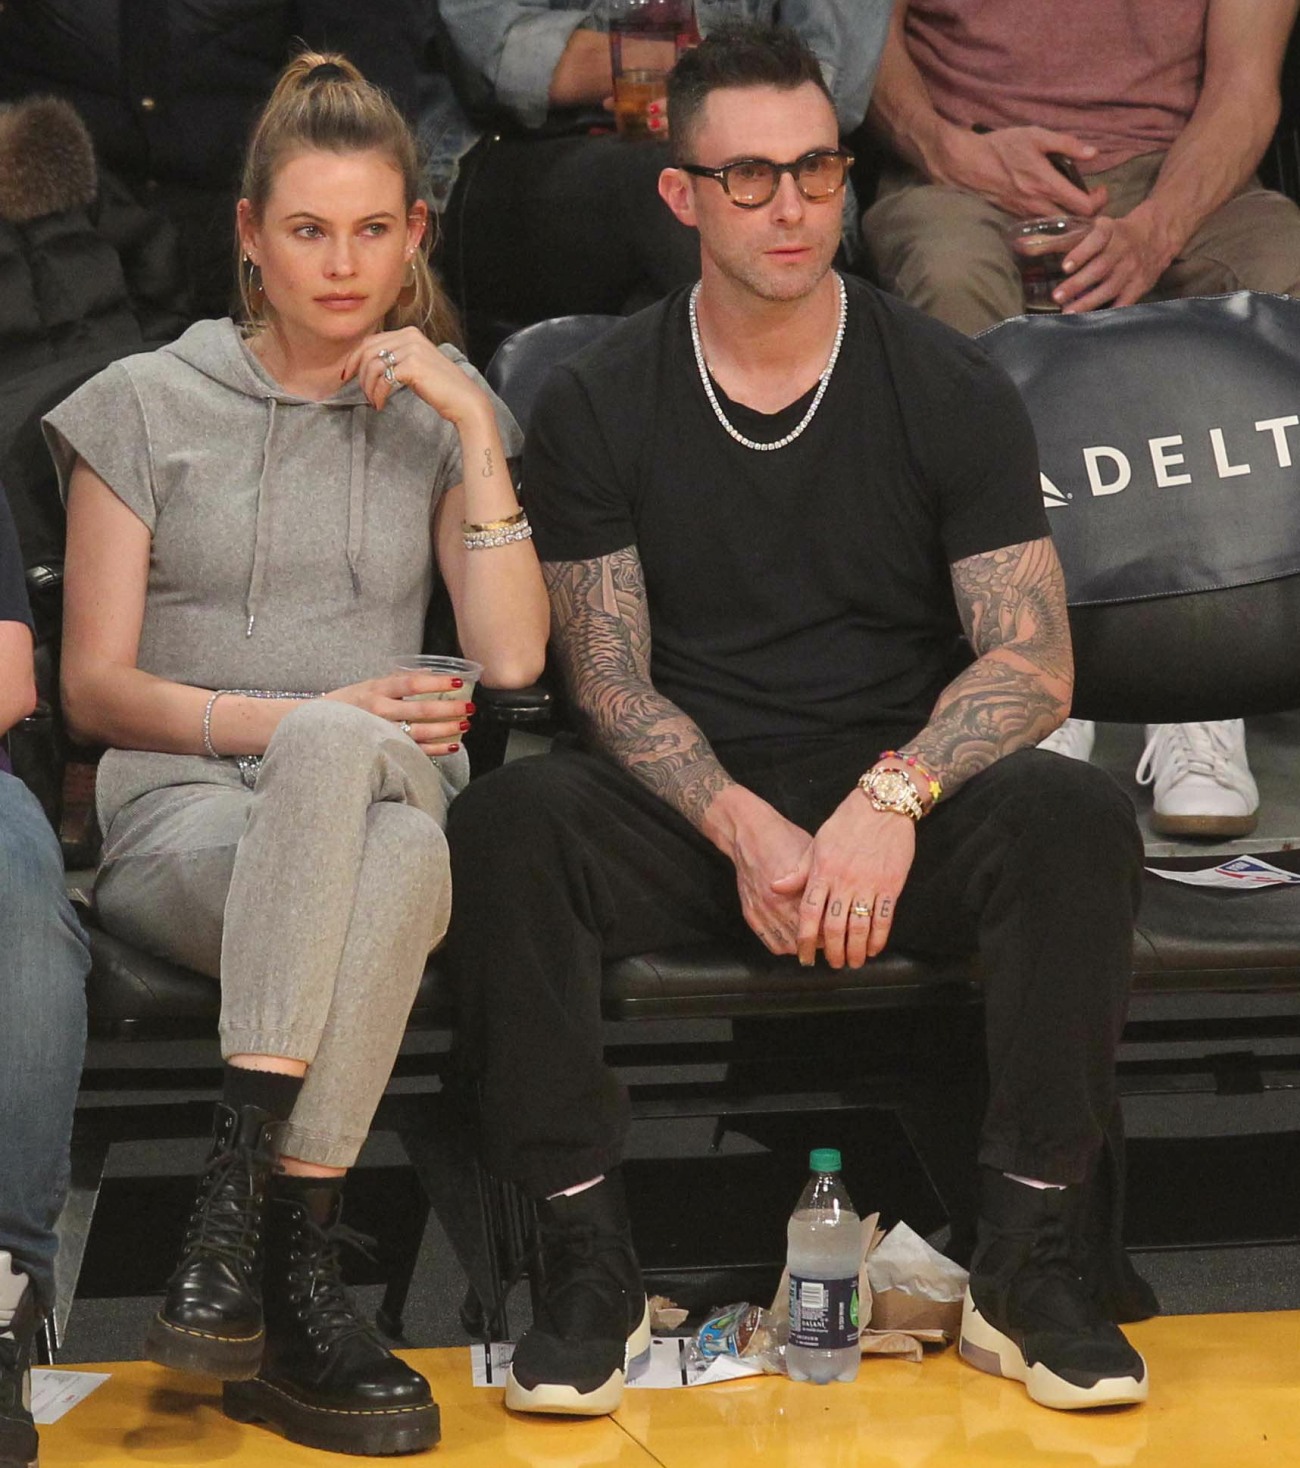 Celebrities at the Los Angeles Lakers game